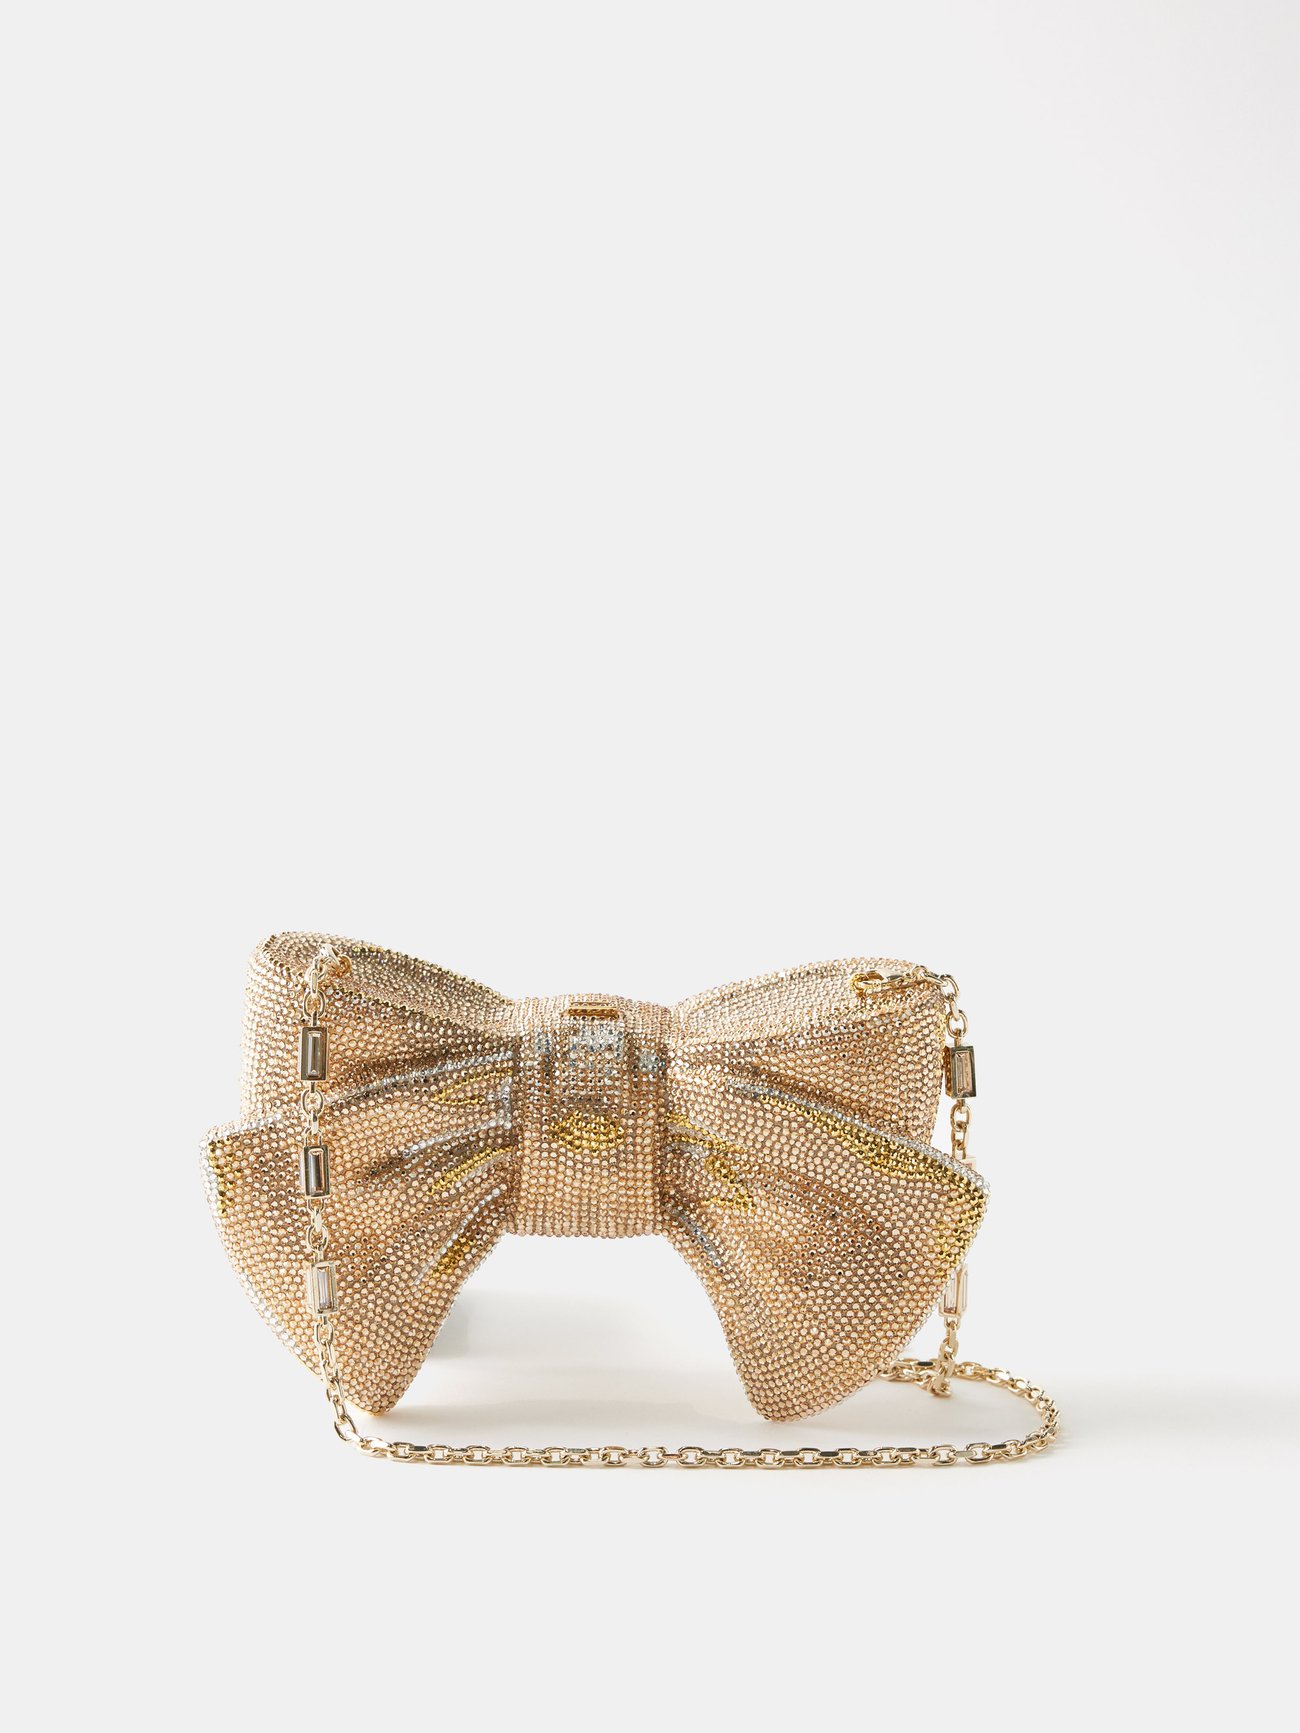 JUDITH LEIBER COUTURE Bow Just for You crystal-embellished gold-tone clutch